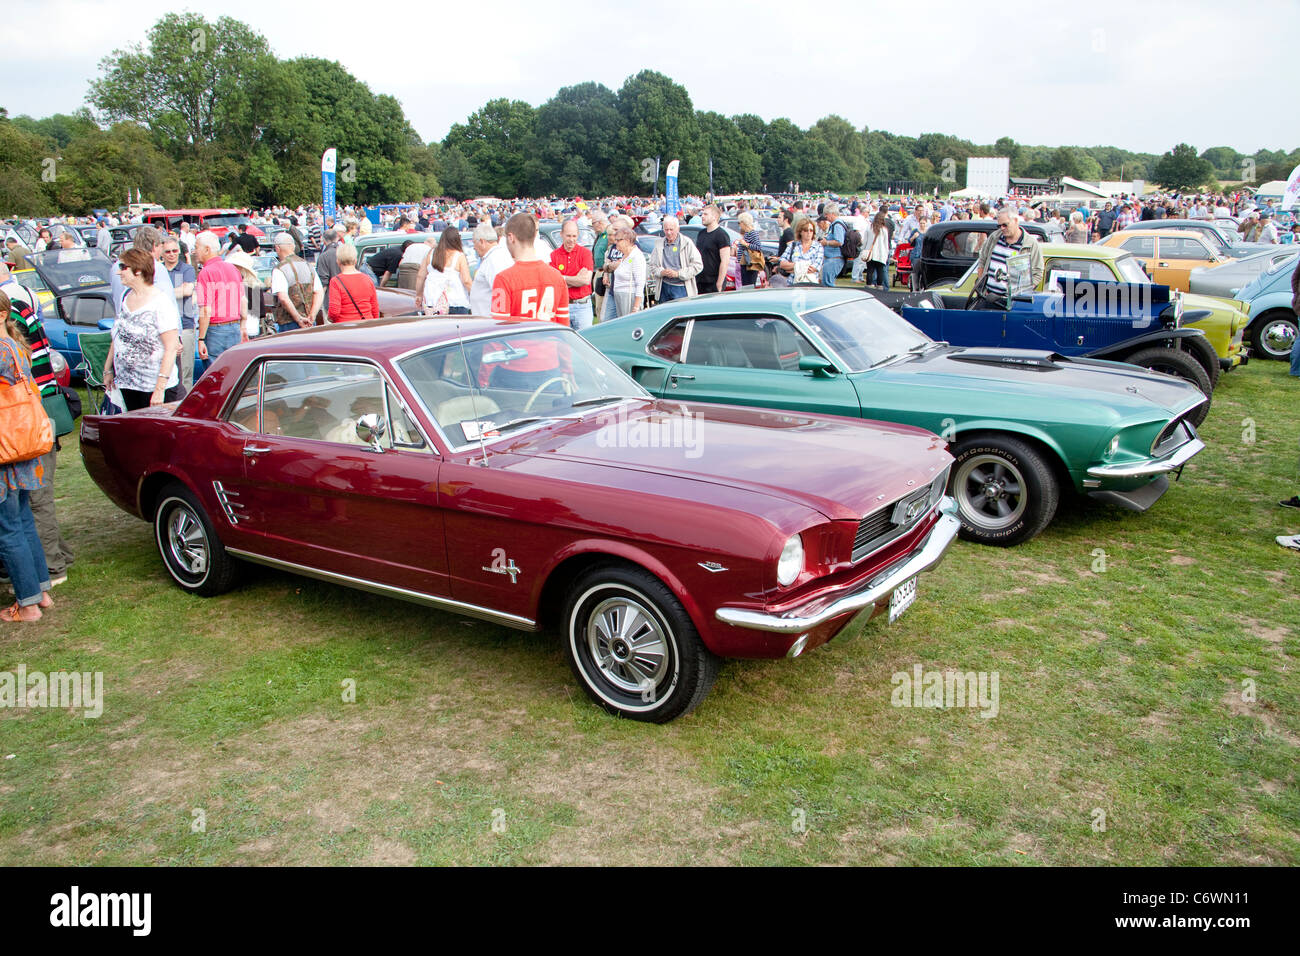 Classics on the Common Harpenden 2011 USA Ford Mustang classic car red 1966 green Mach 1 1969 Cobra jet 428 muscle motor show Stock Photo